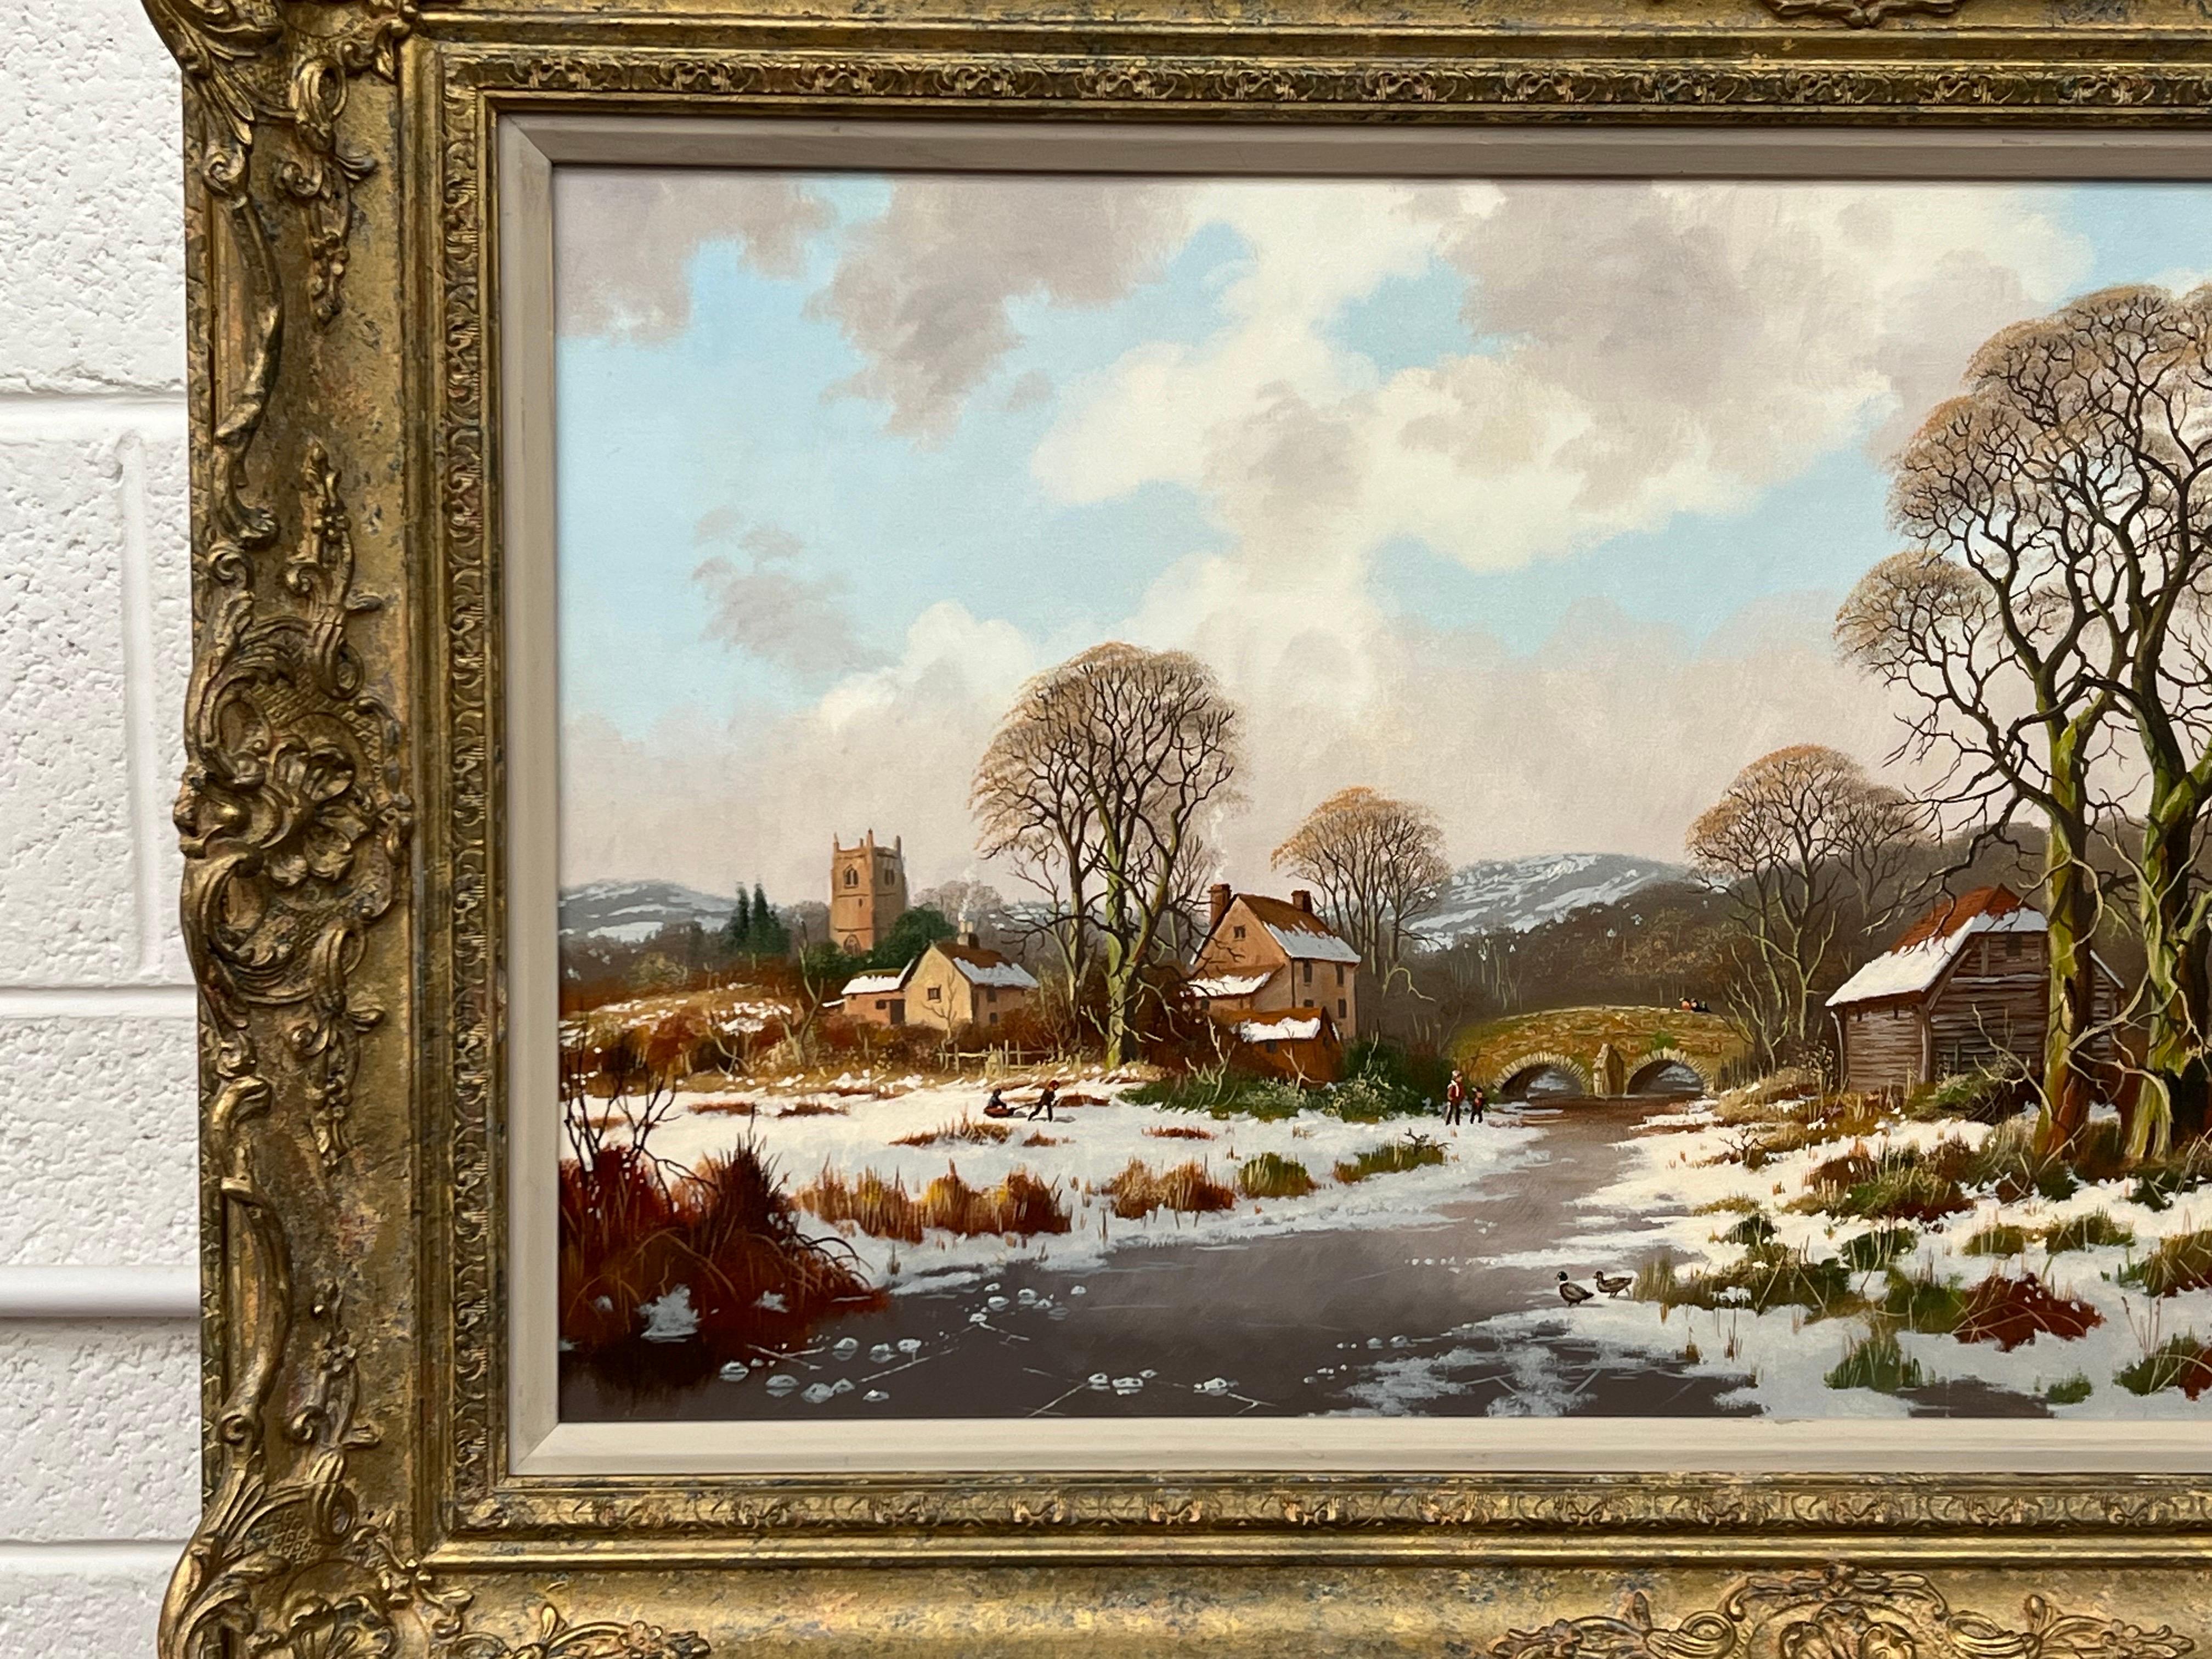 A traditional original oil painting of a Winter Village Landscape with Families & Children by 20th Century British Artist. 

Art measures 29 x 14 inches
Frame measures 35 x 20 inches  

Vincent Selby (1919 - 2004) British Landscape Artist, was born